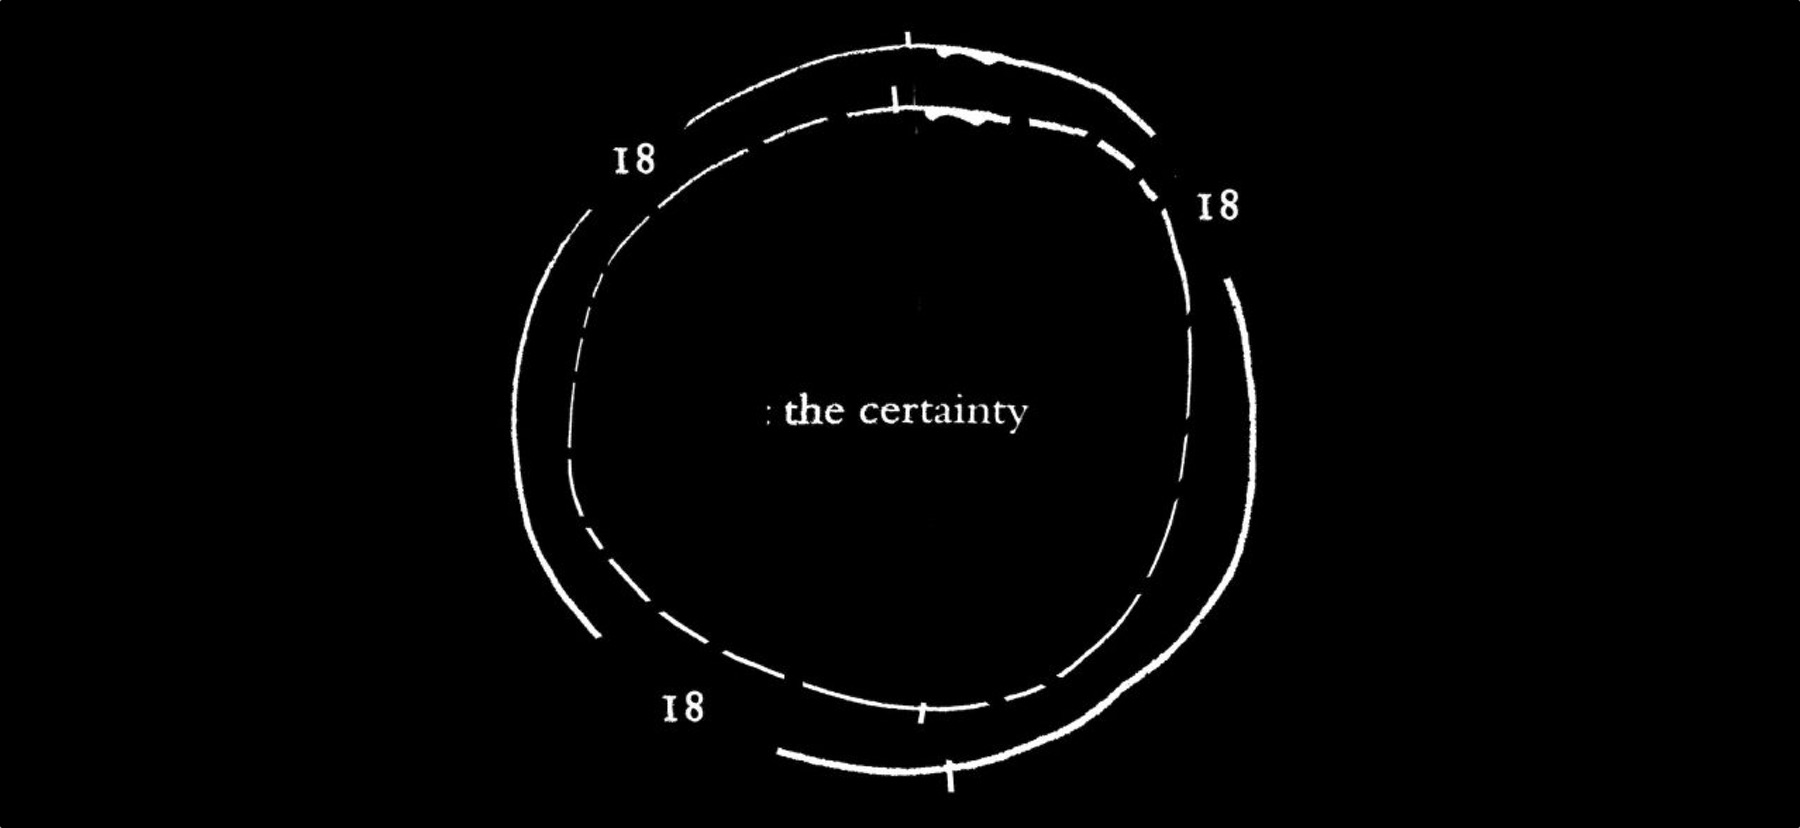 The word certainty in a circle surrounded by the number 18